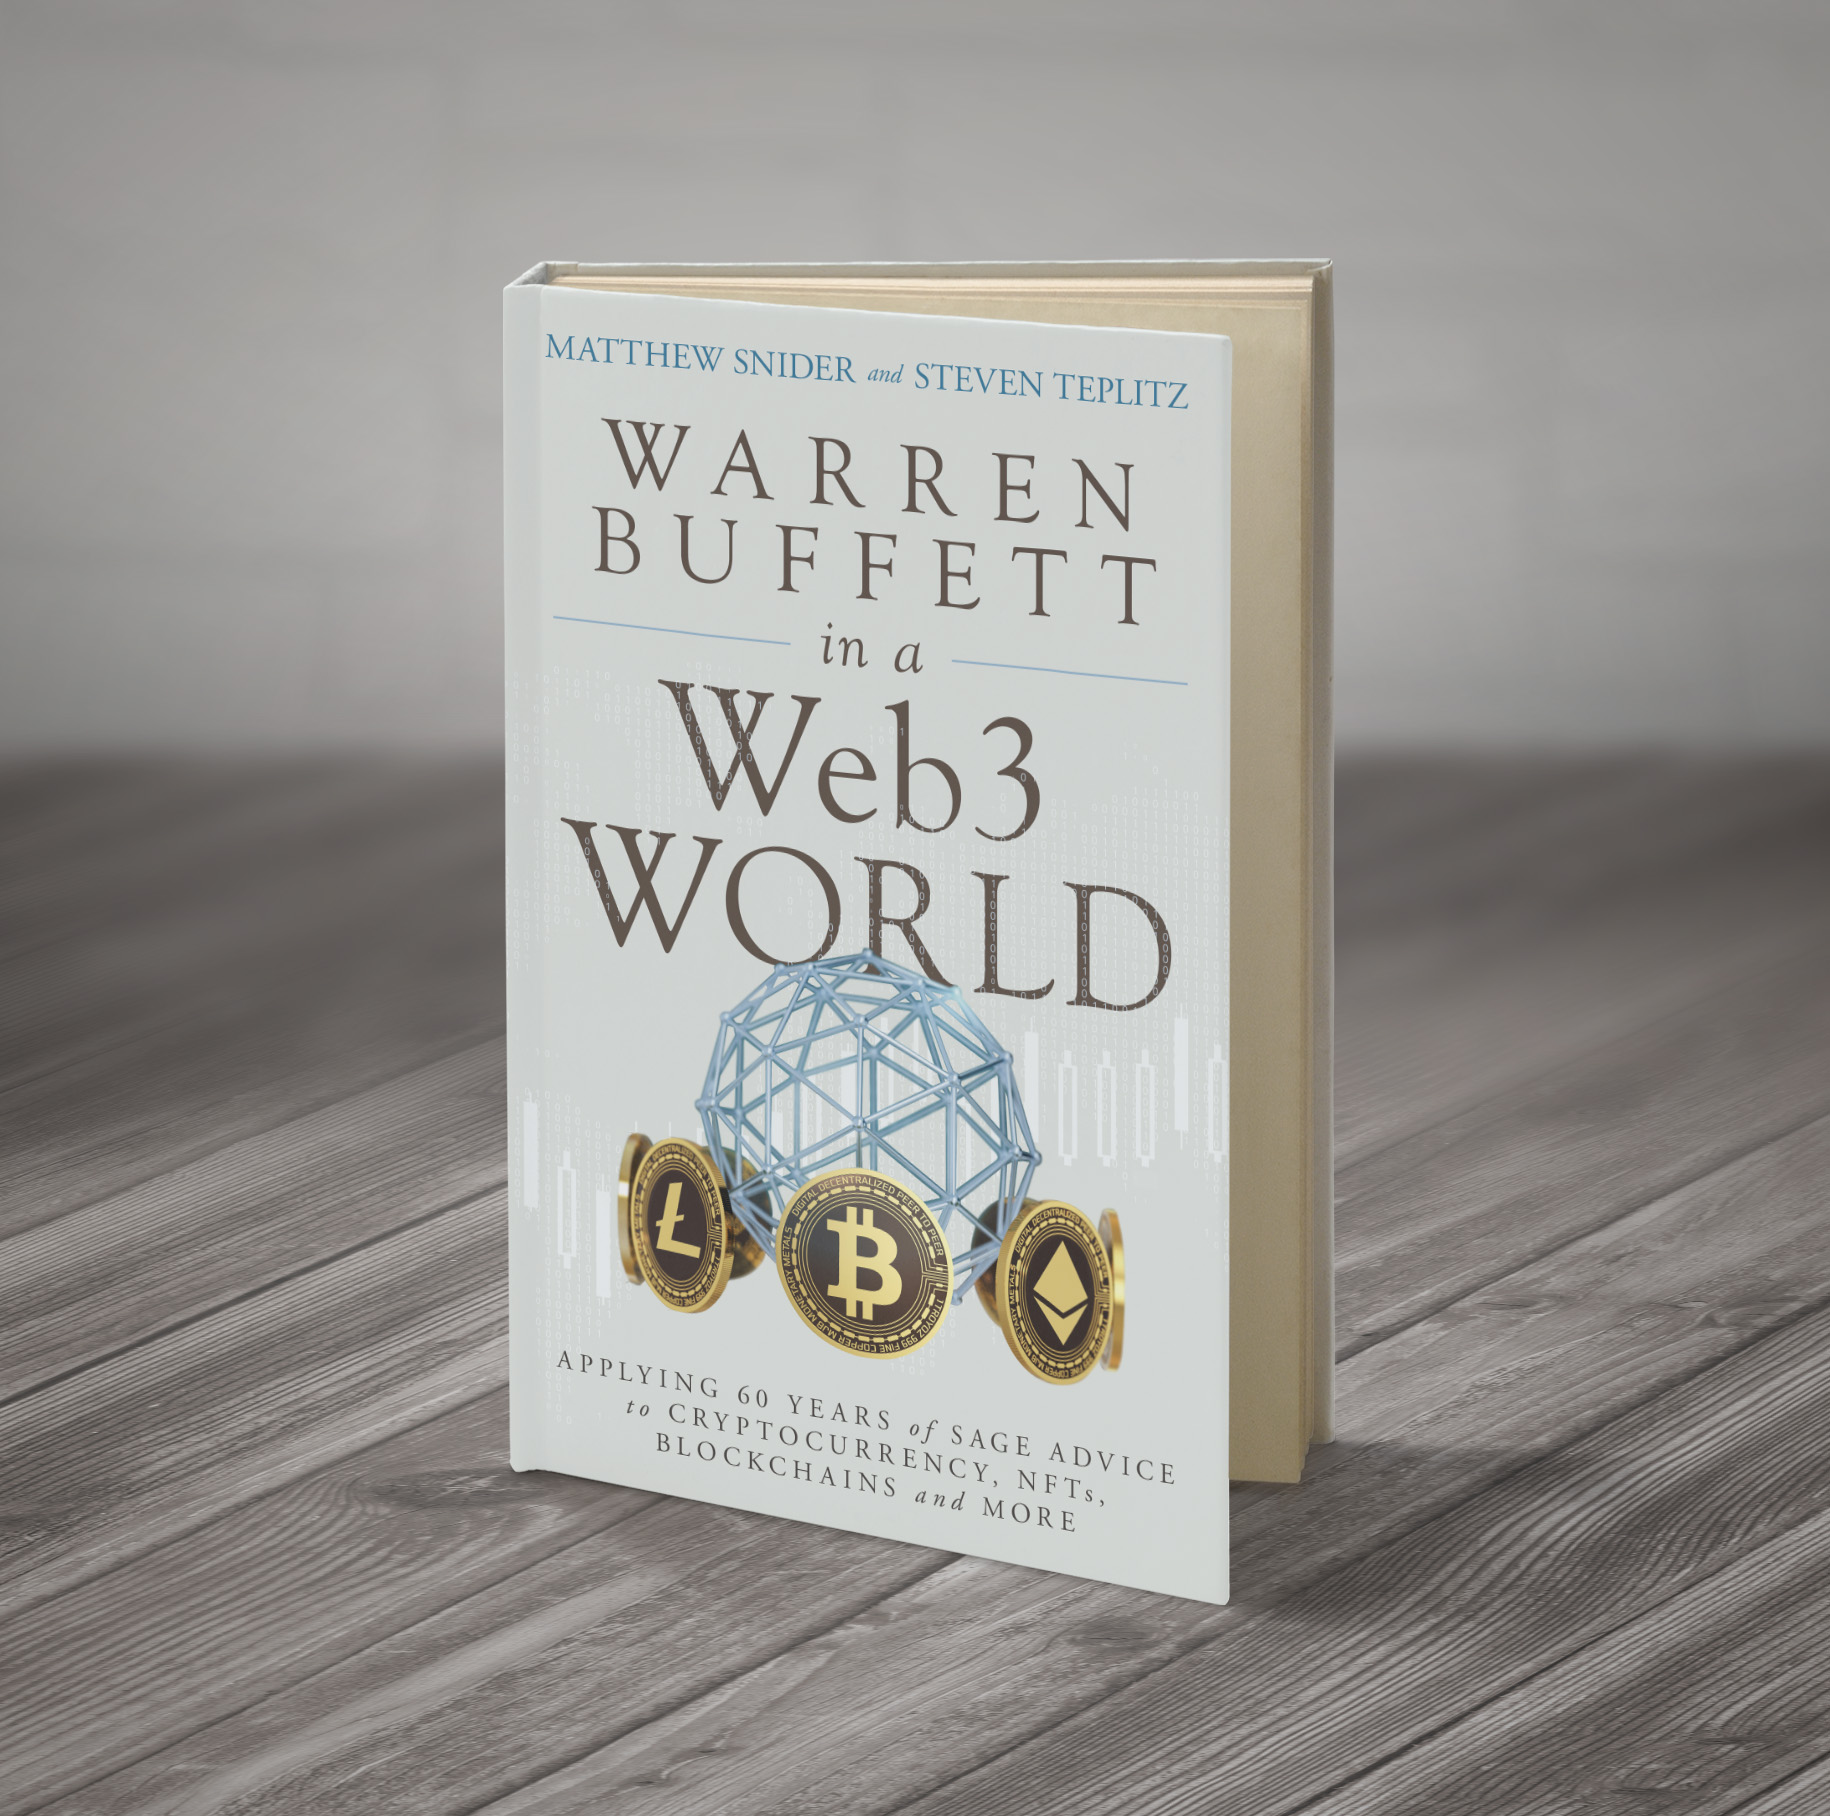 “Warren Buffet in a Web3 World: Applying 60 Years of Sage Advice to Cryptocurrency, NFTs, Blockchains & More”.